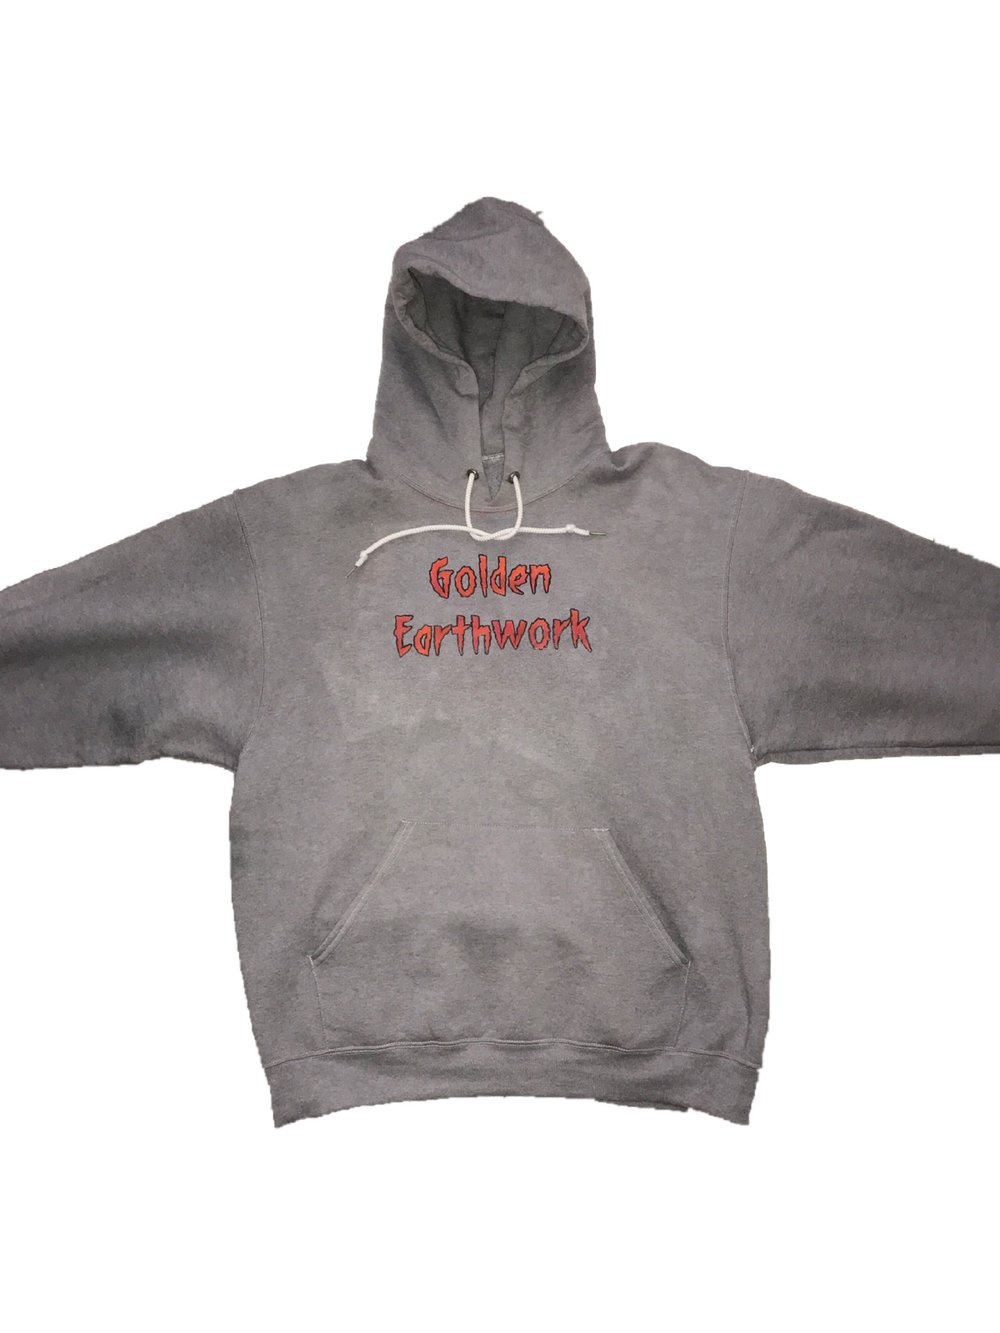 Image of Dark wash Friday the 13th edition hoodie